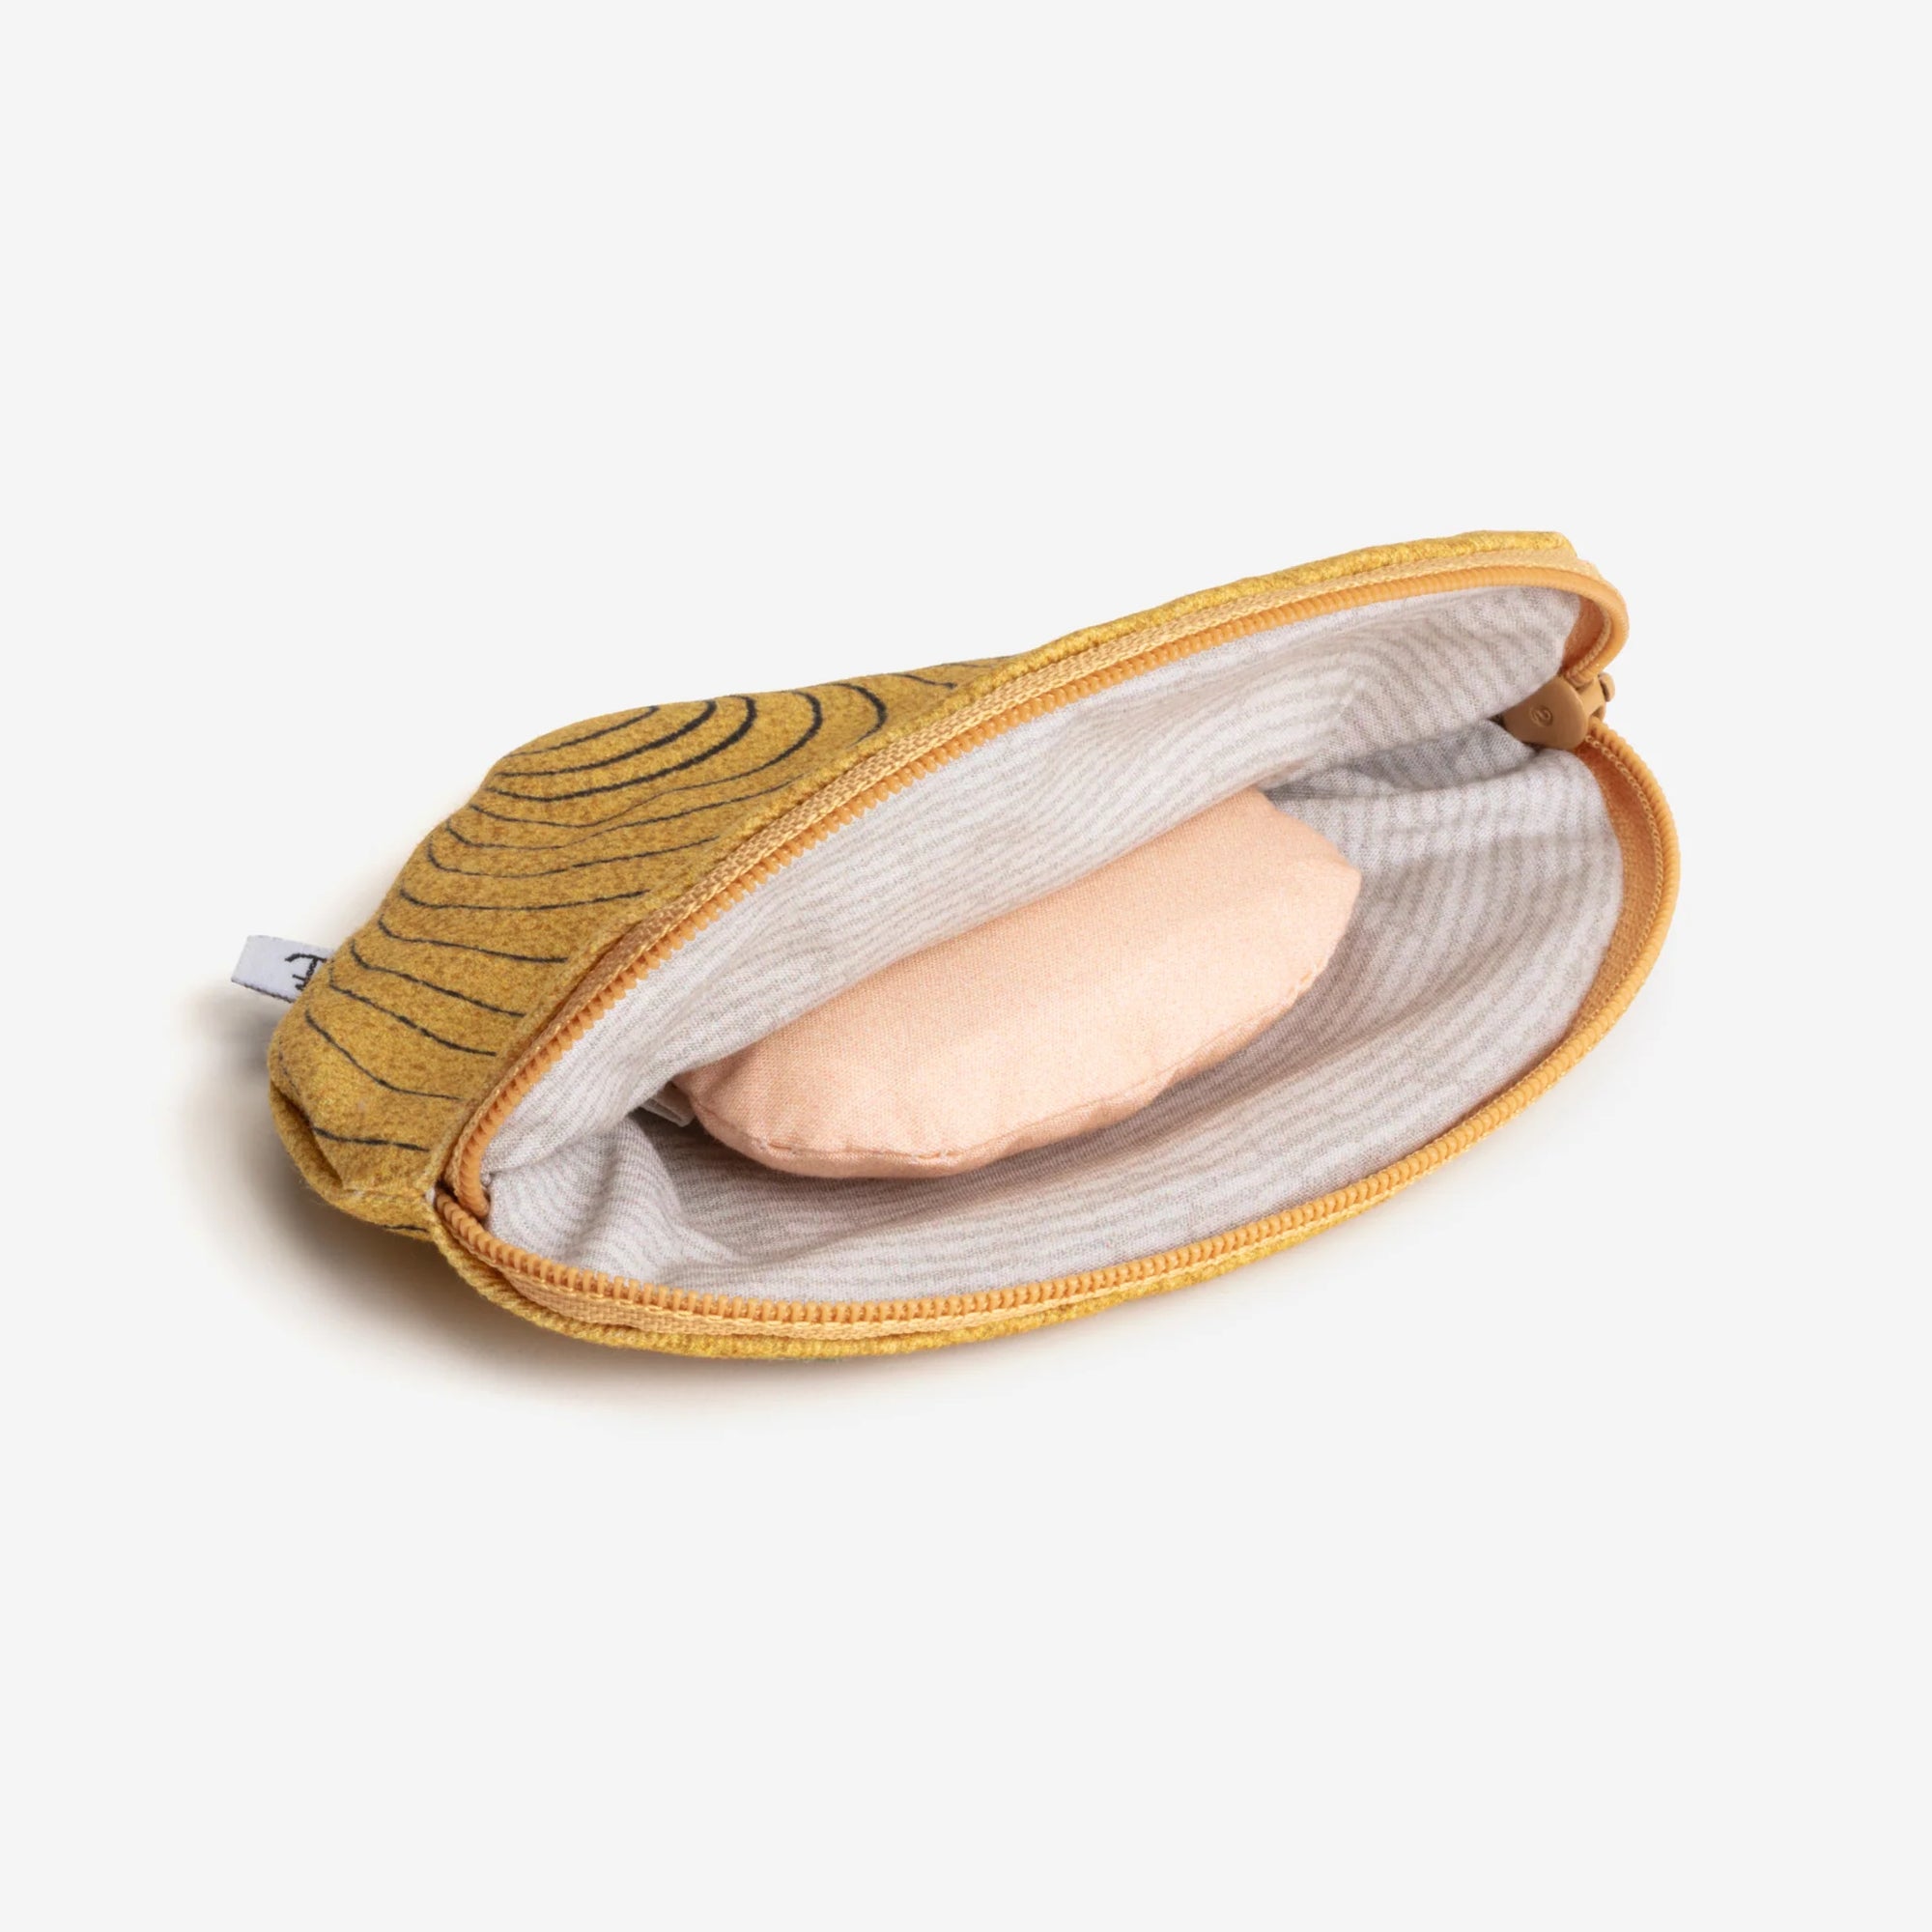 NOTIONS POUCH - CLAM